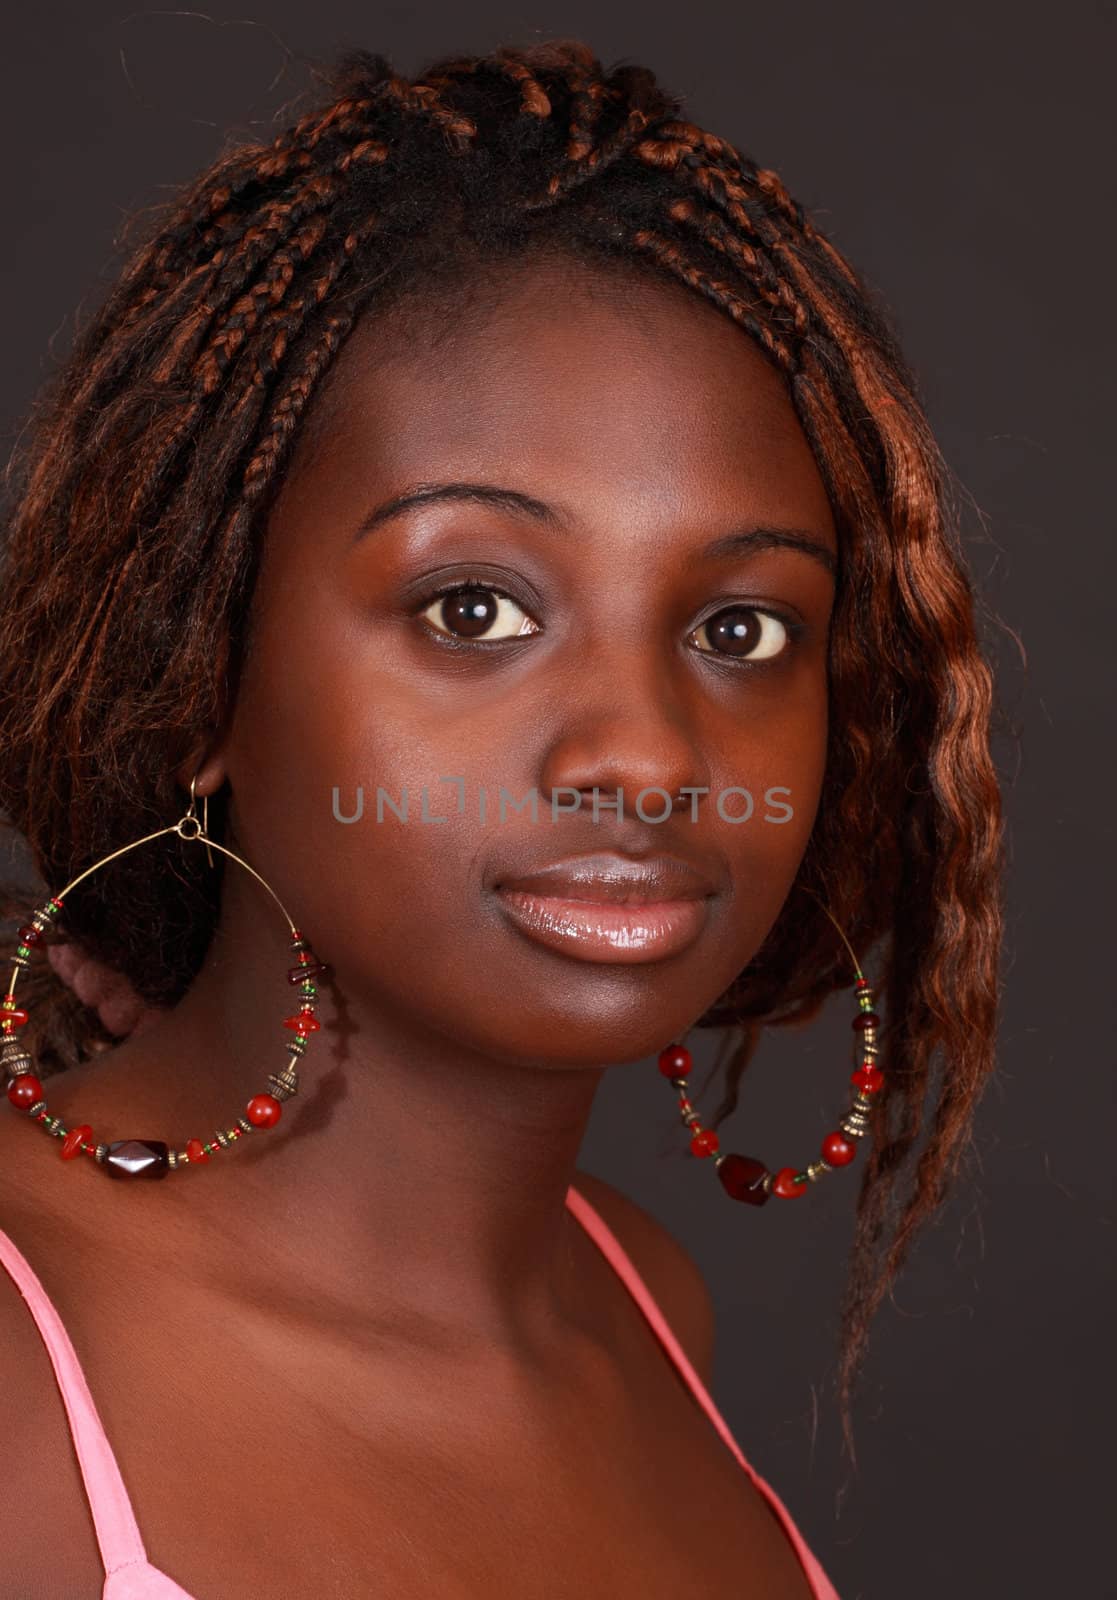 portrait of a beautiful young african woman